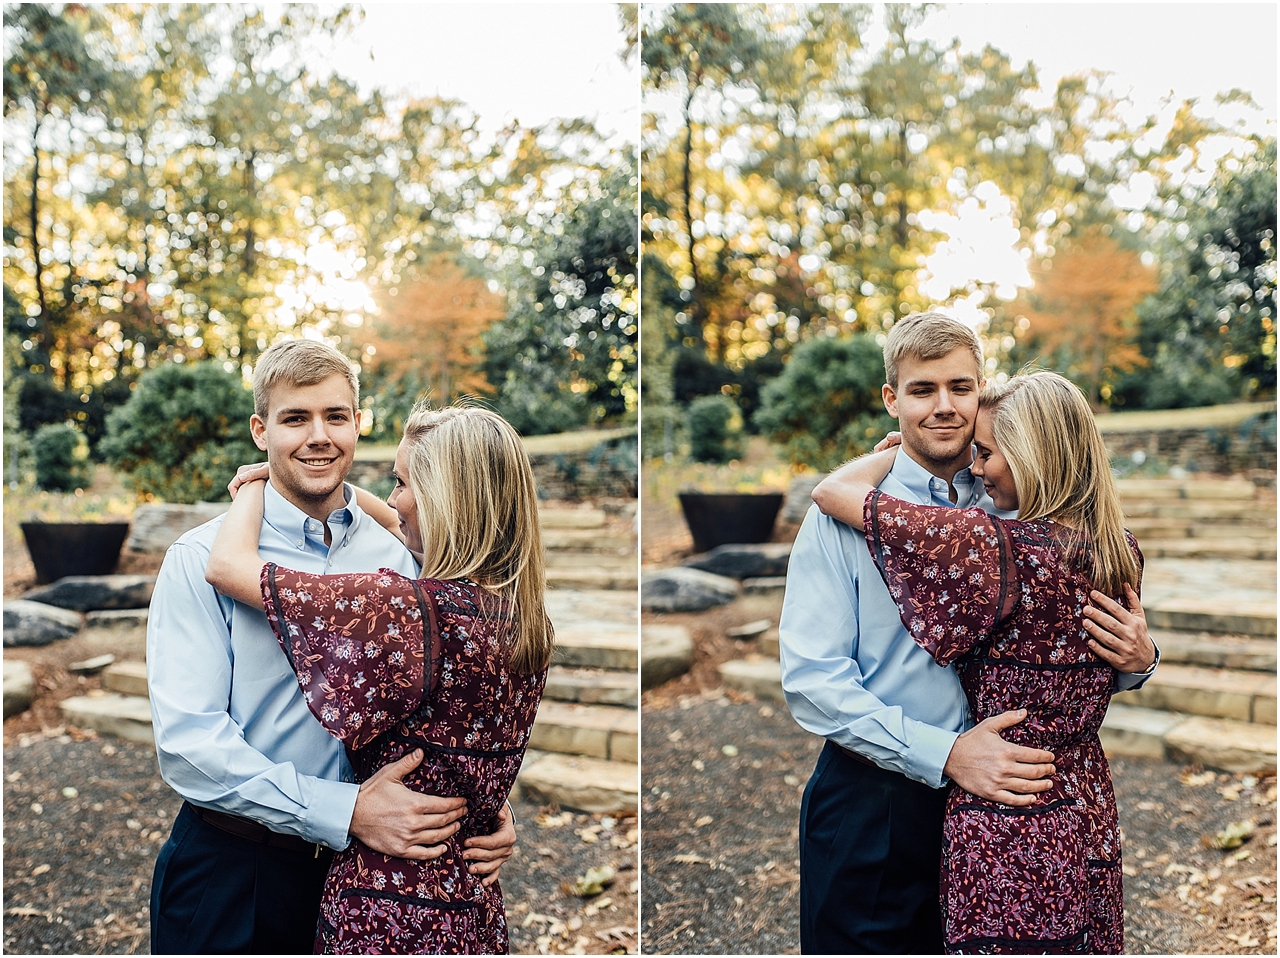  Lindsey Ann Photography -&nbsp;Engagement session at the Botanical Gardens in Downtown Birmingham 